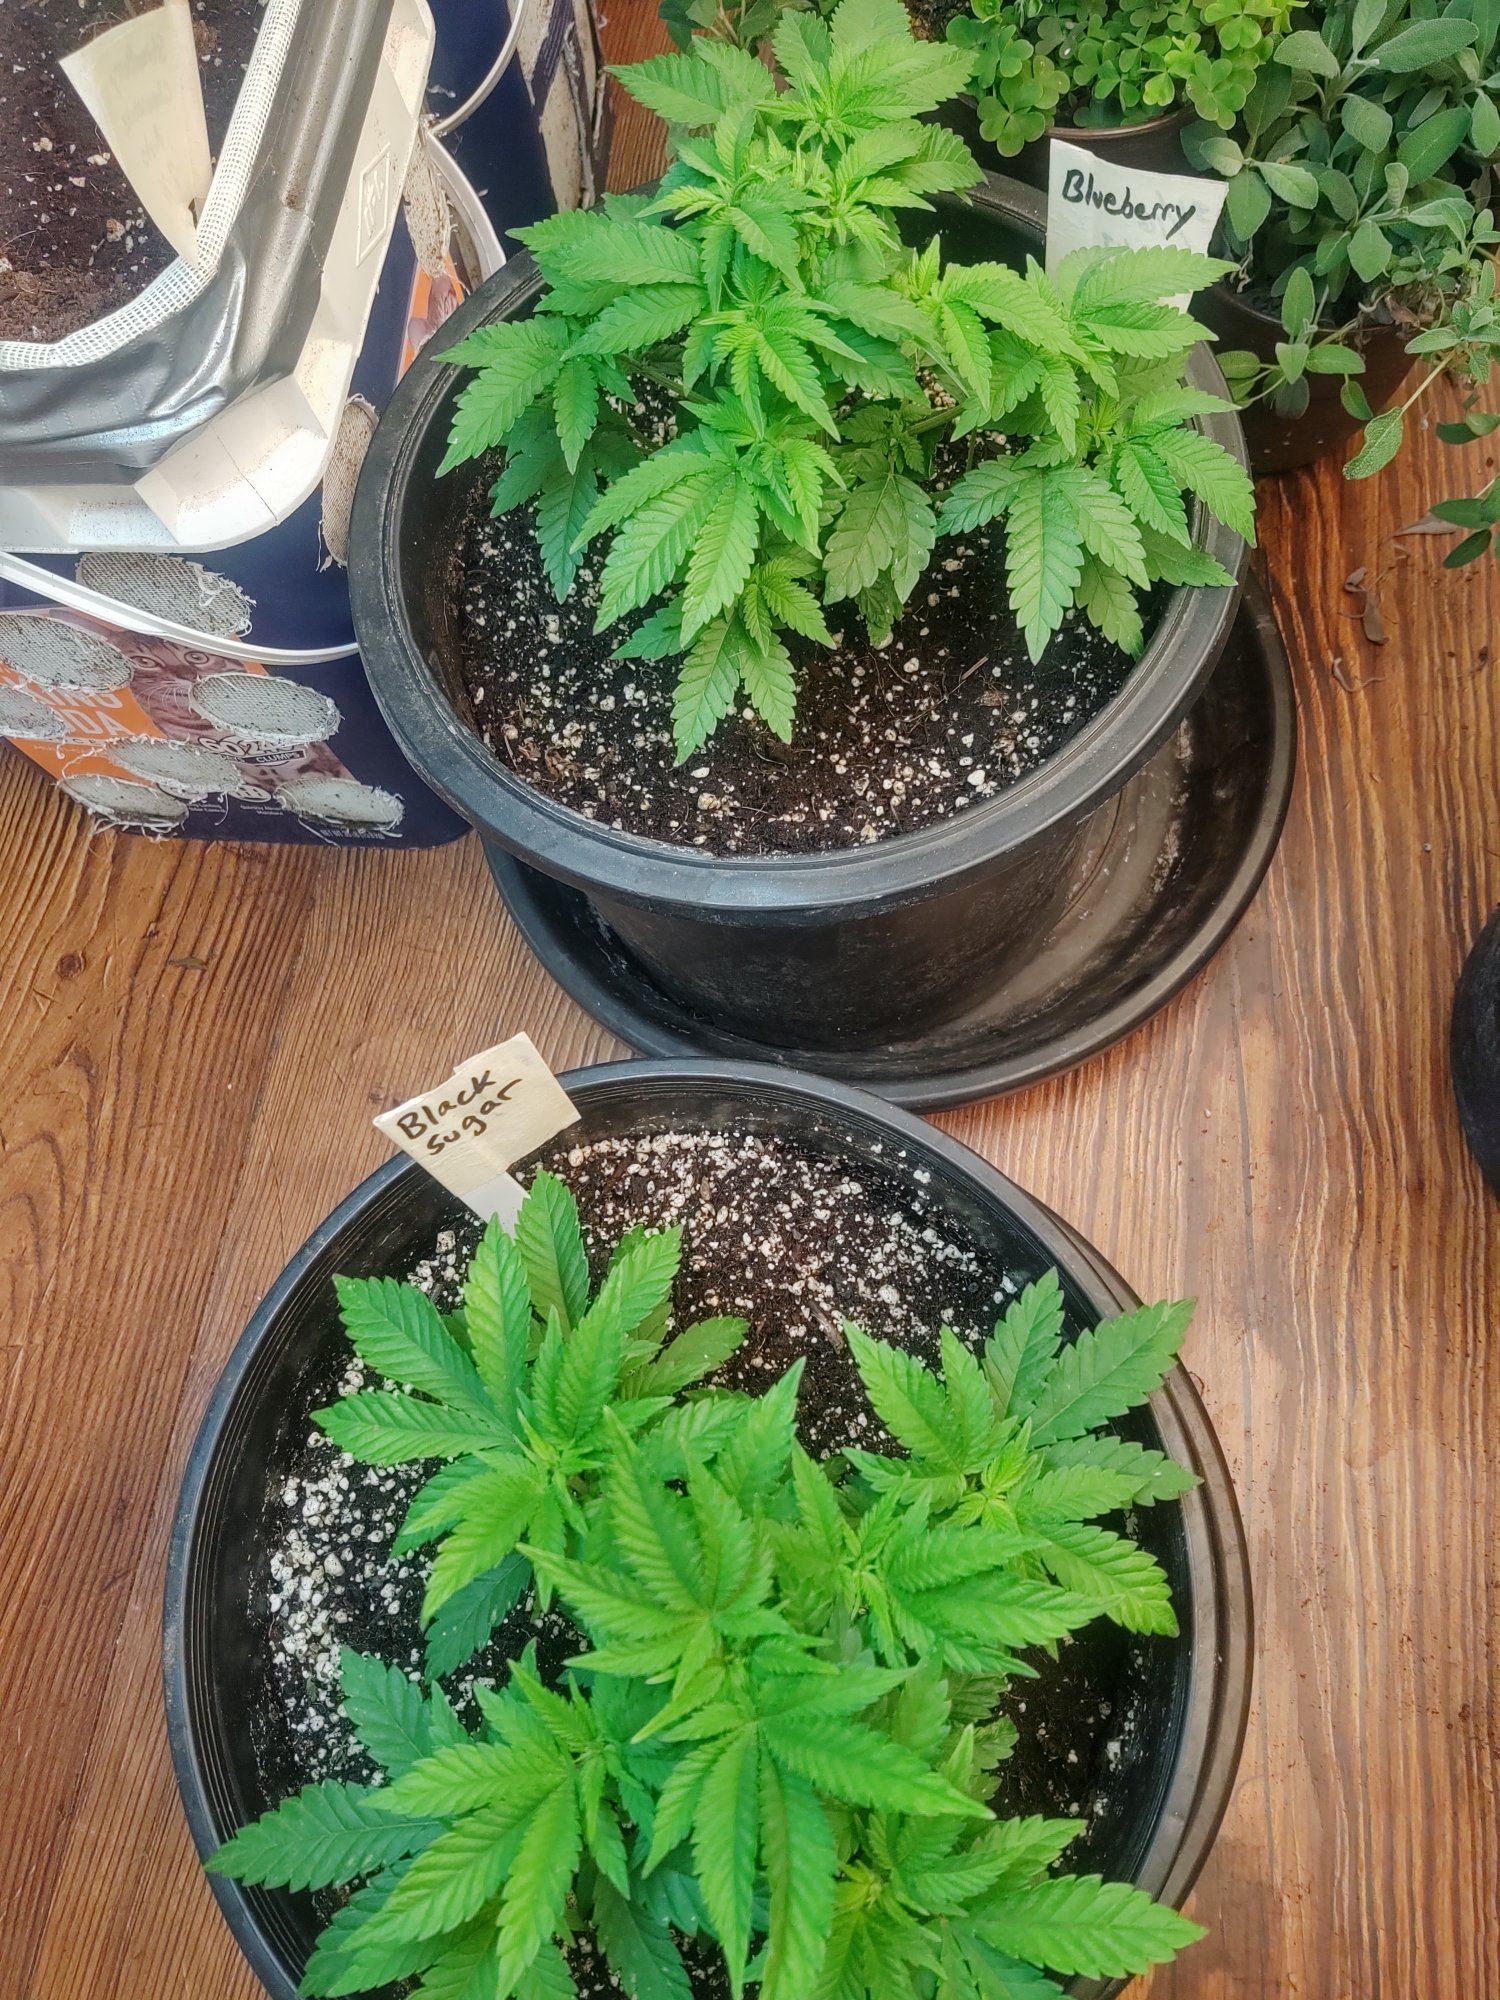 Issues with slowed growth and spots 2